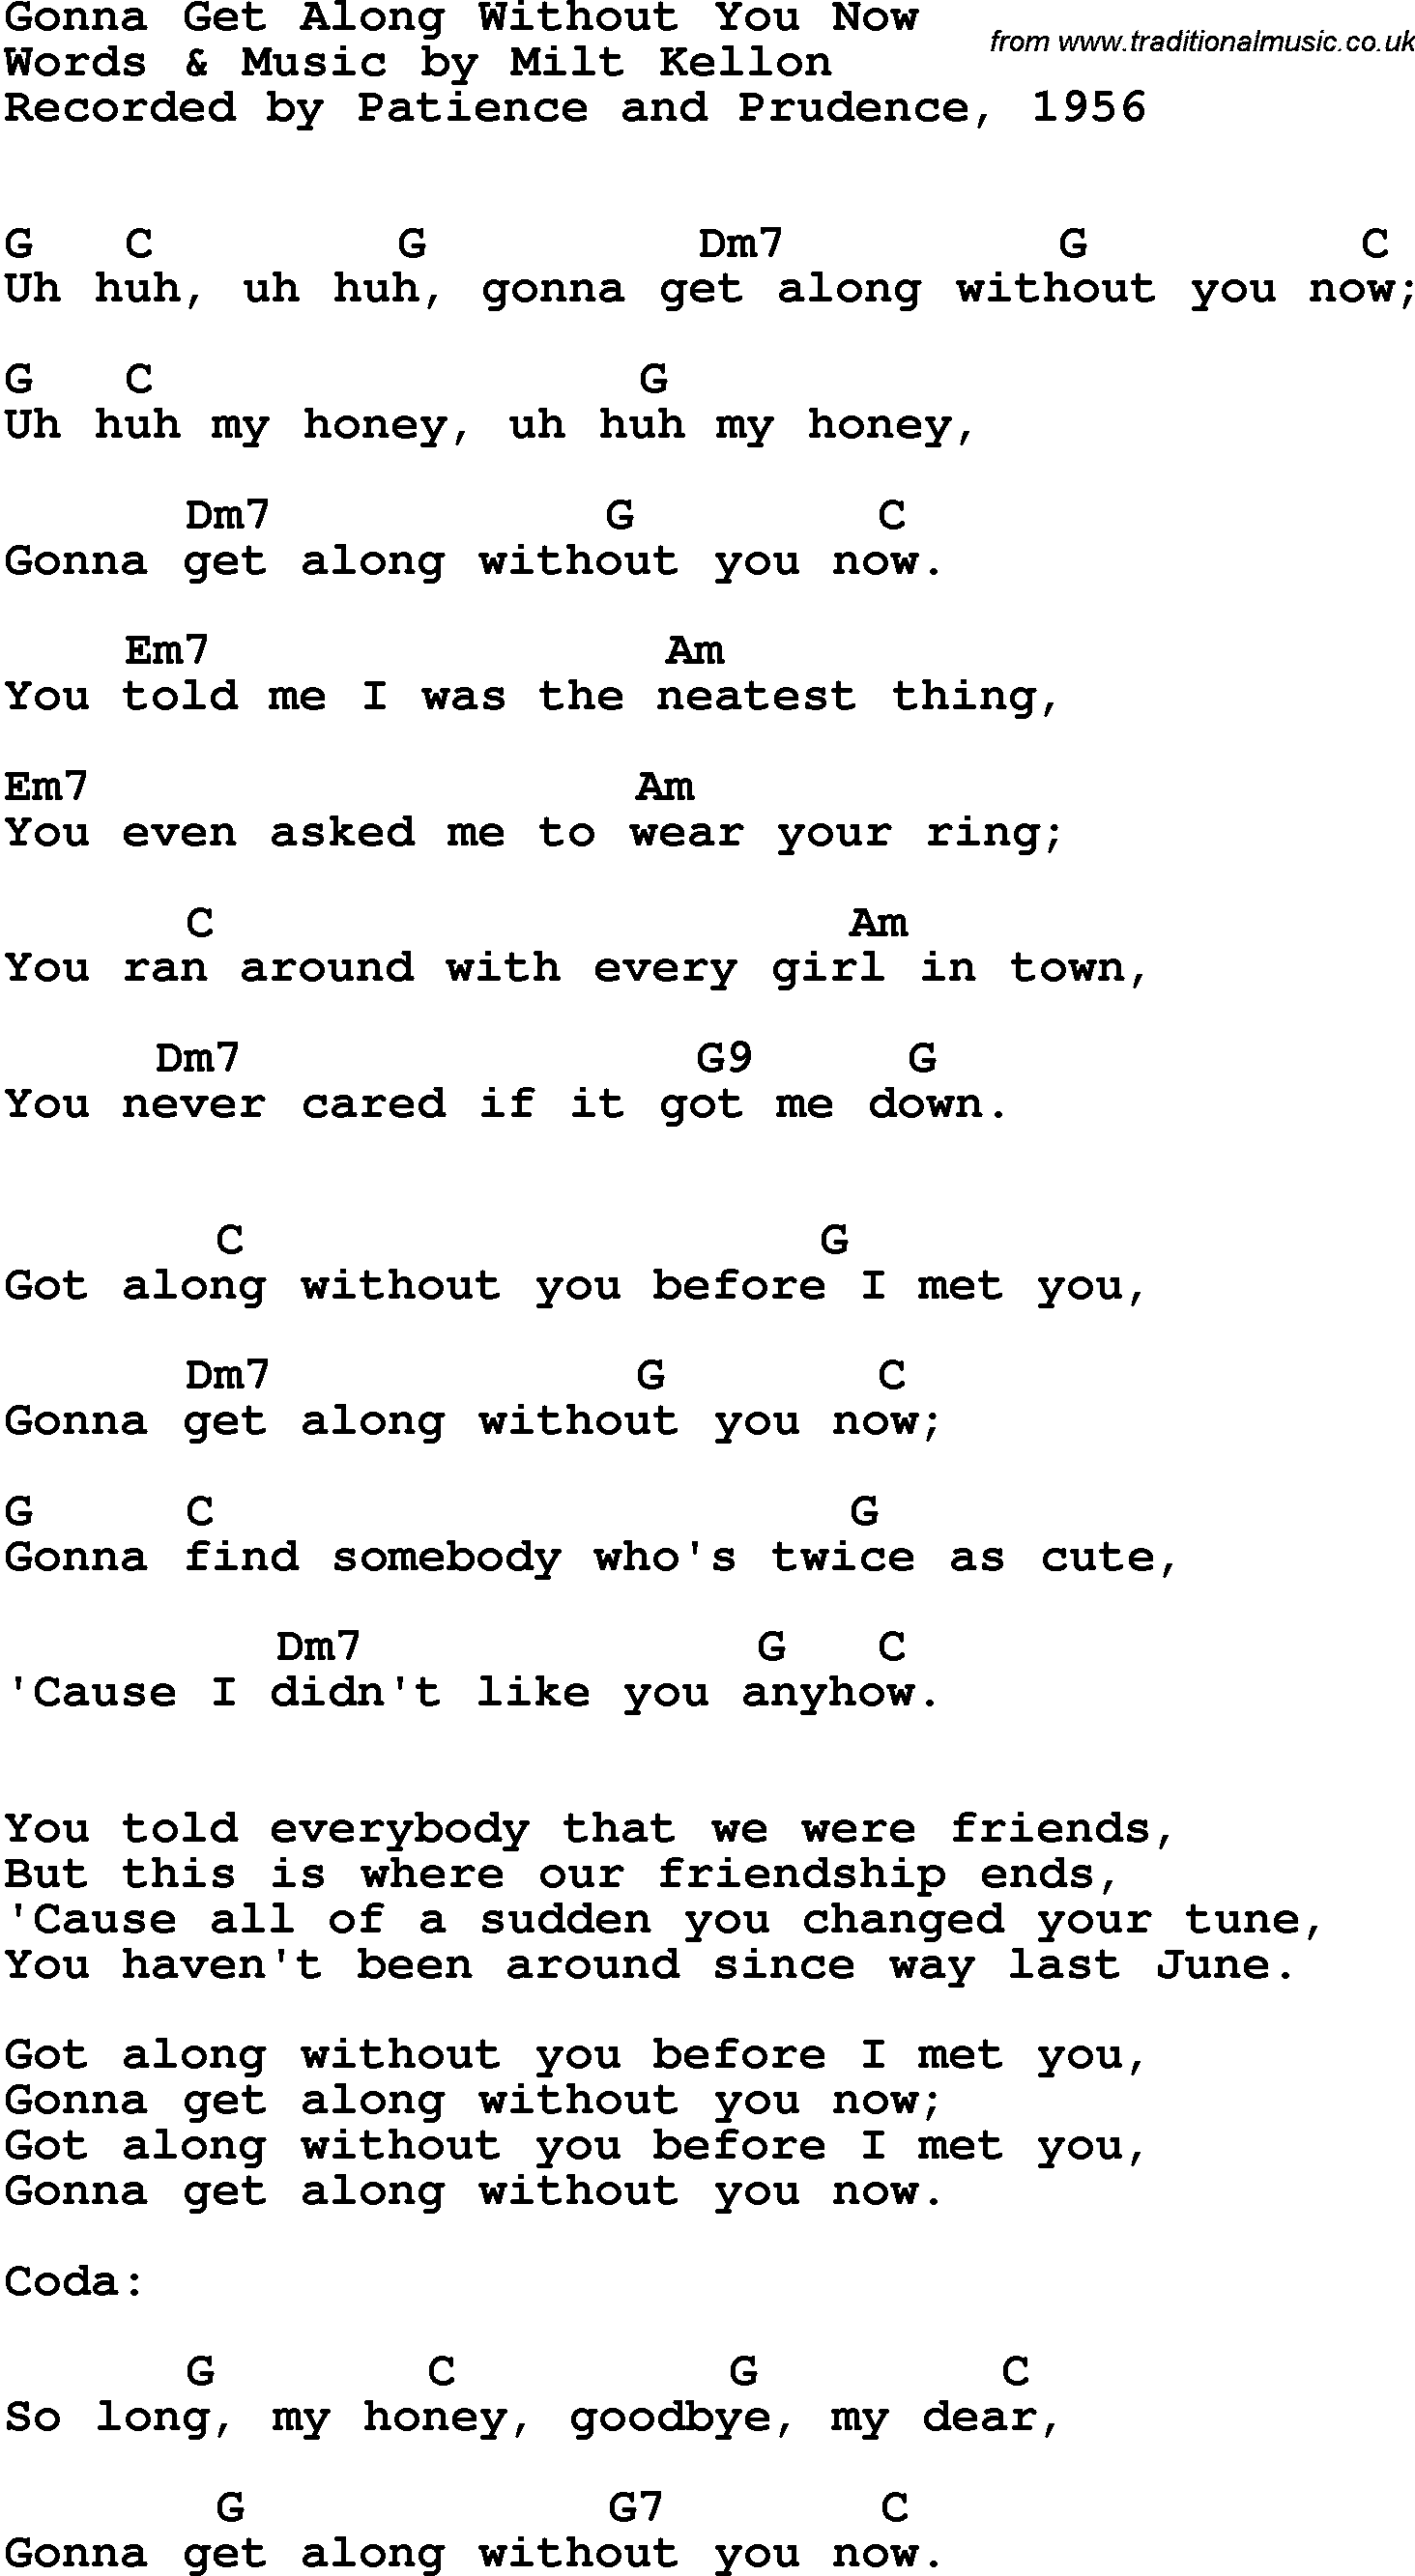 Song Lyrics with guitar chords for Gonna Get Along Without Ya Now - Patience & Prudence, 1956